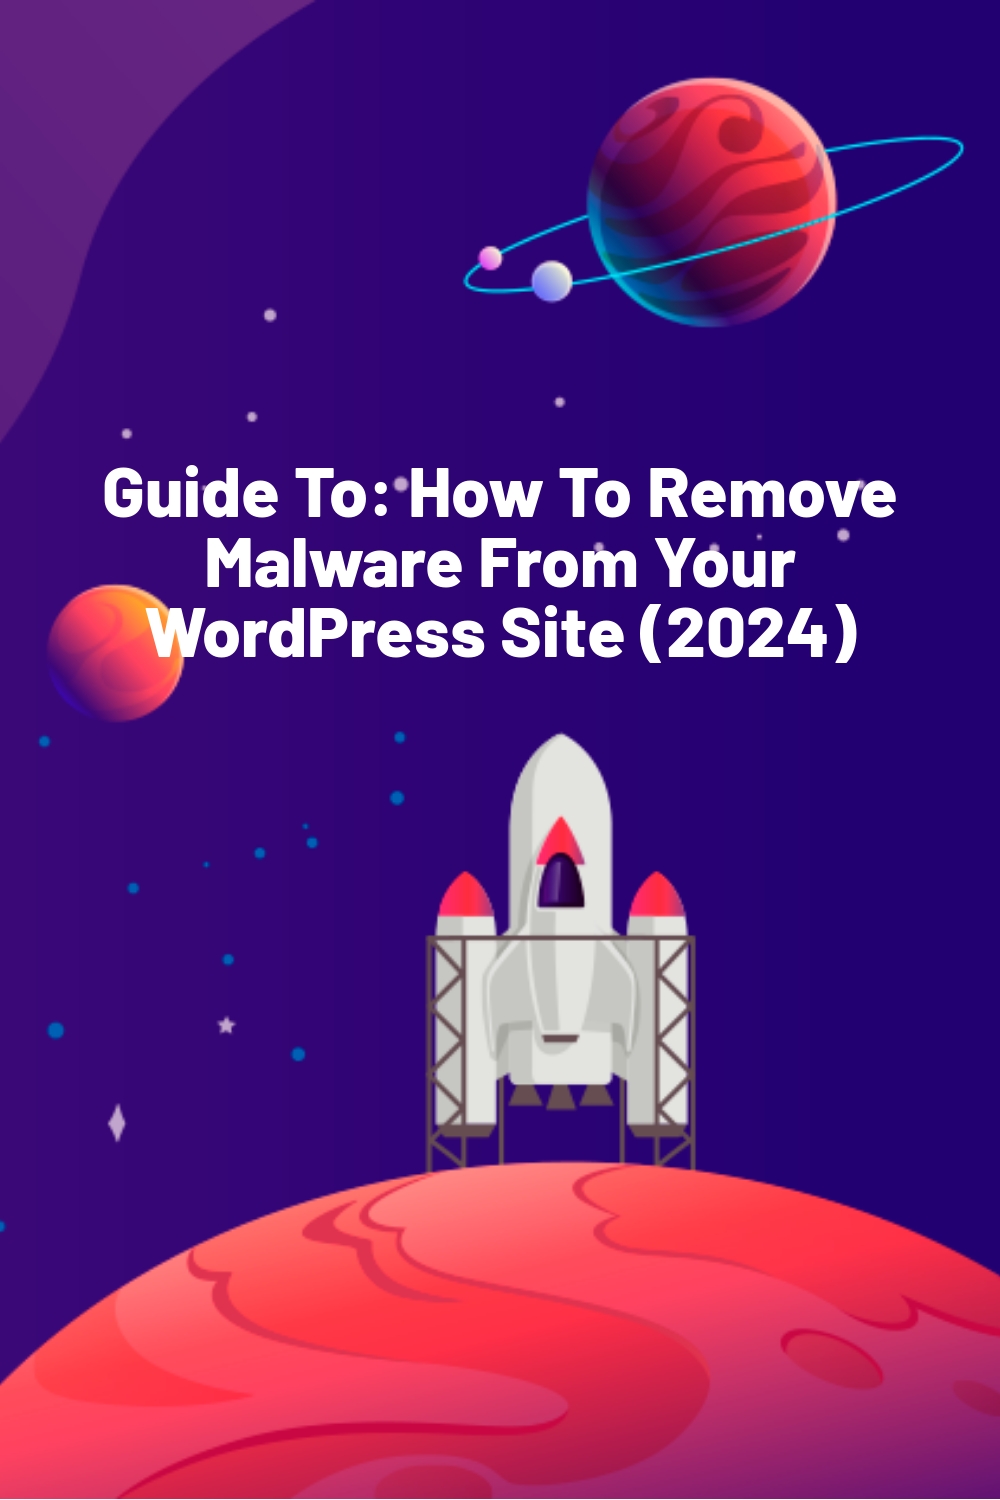 Guide To: How To Remove Malware From Your WordPress Site (2024)